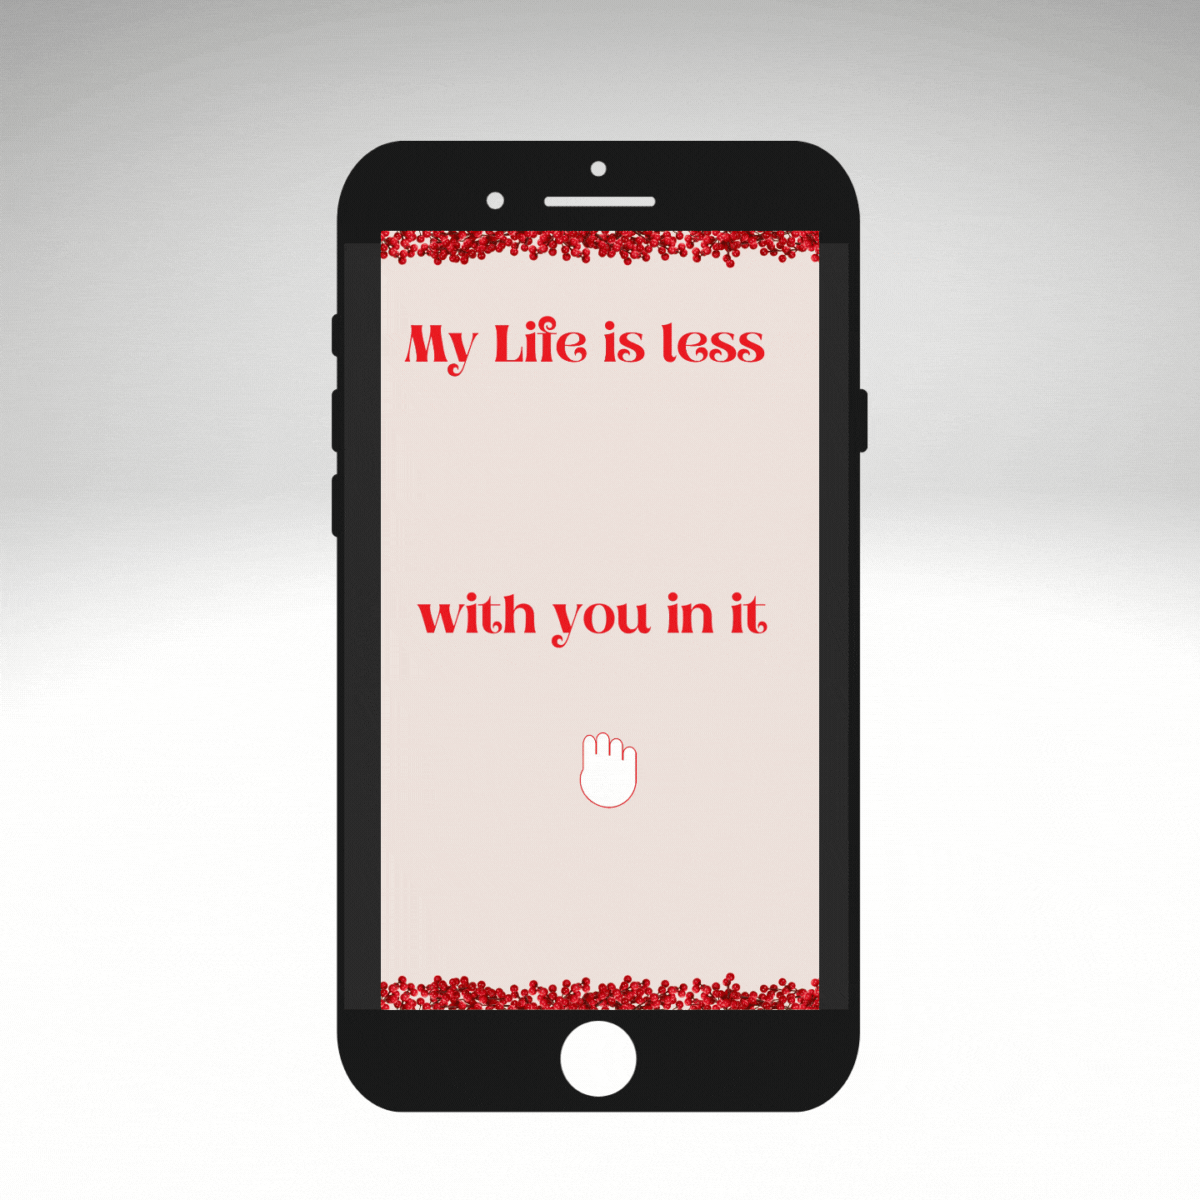 Valentines MP4 Video Message - Life is Less S#@t With You In It 